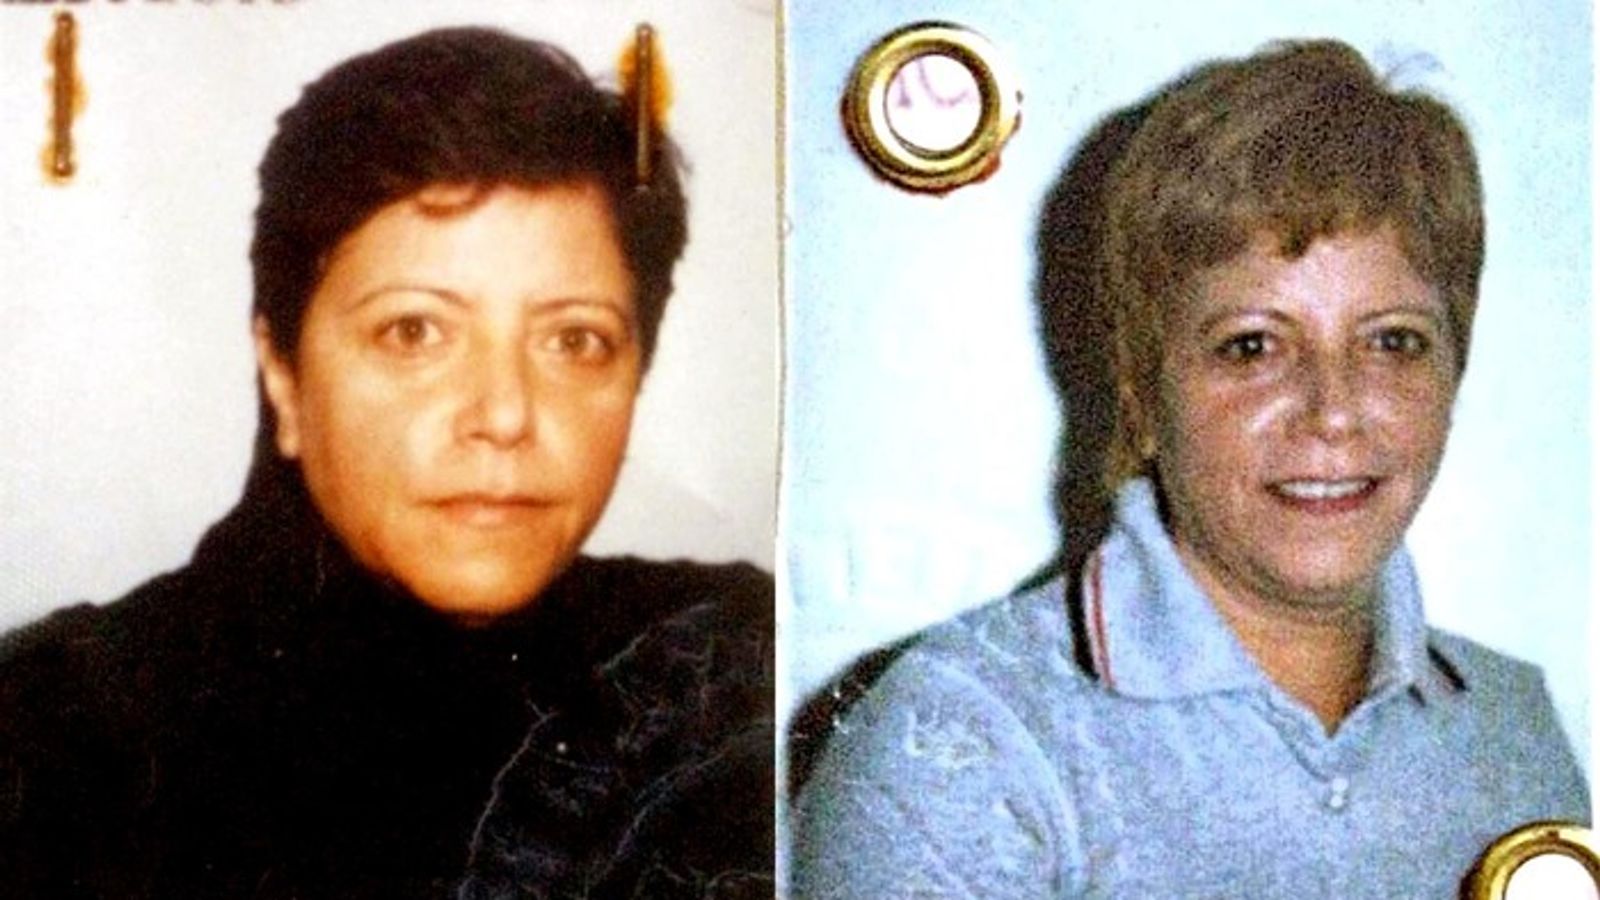 Maria Licciardi: Suspected female mafia boss dubbed the ‘godmother’ arrested while trying to board flight from Rome to Spain